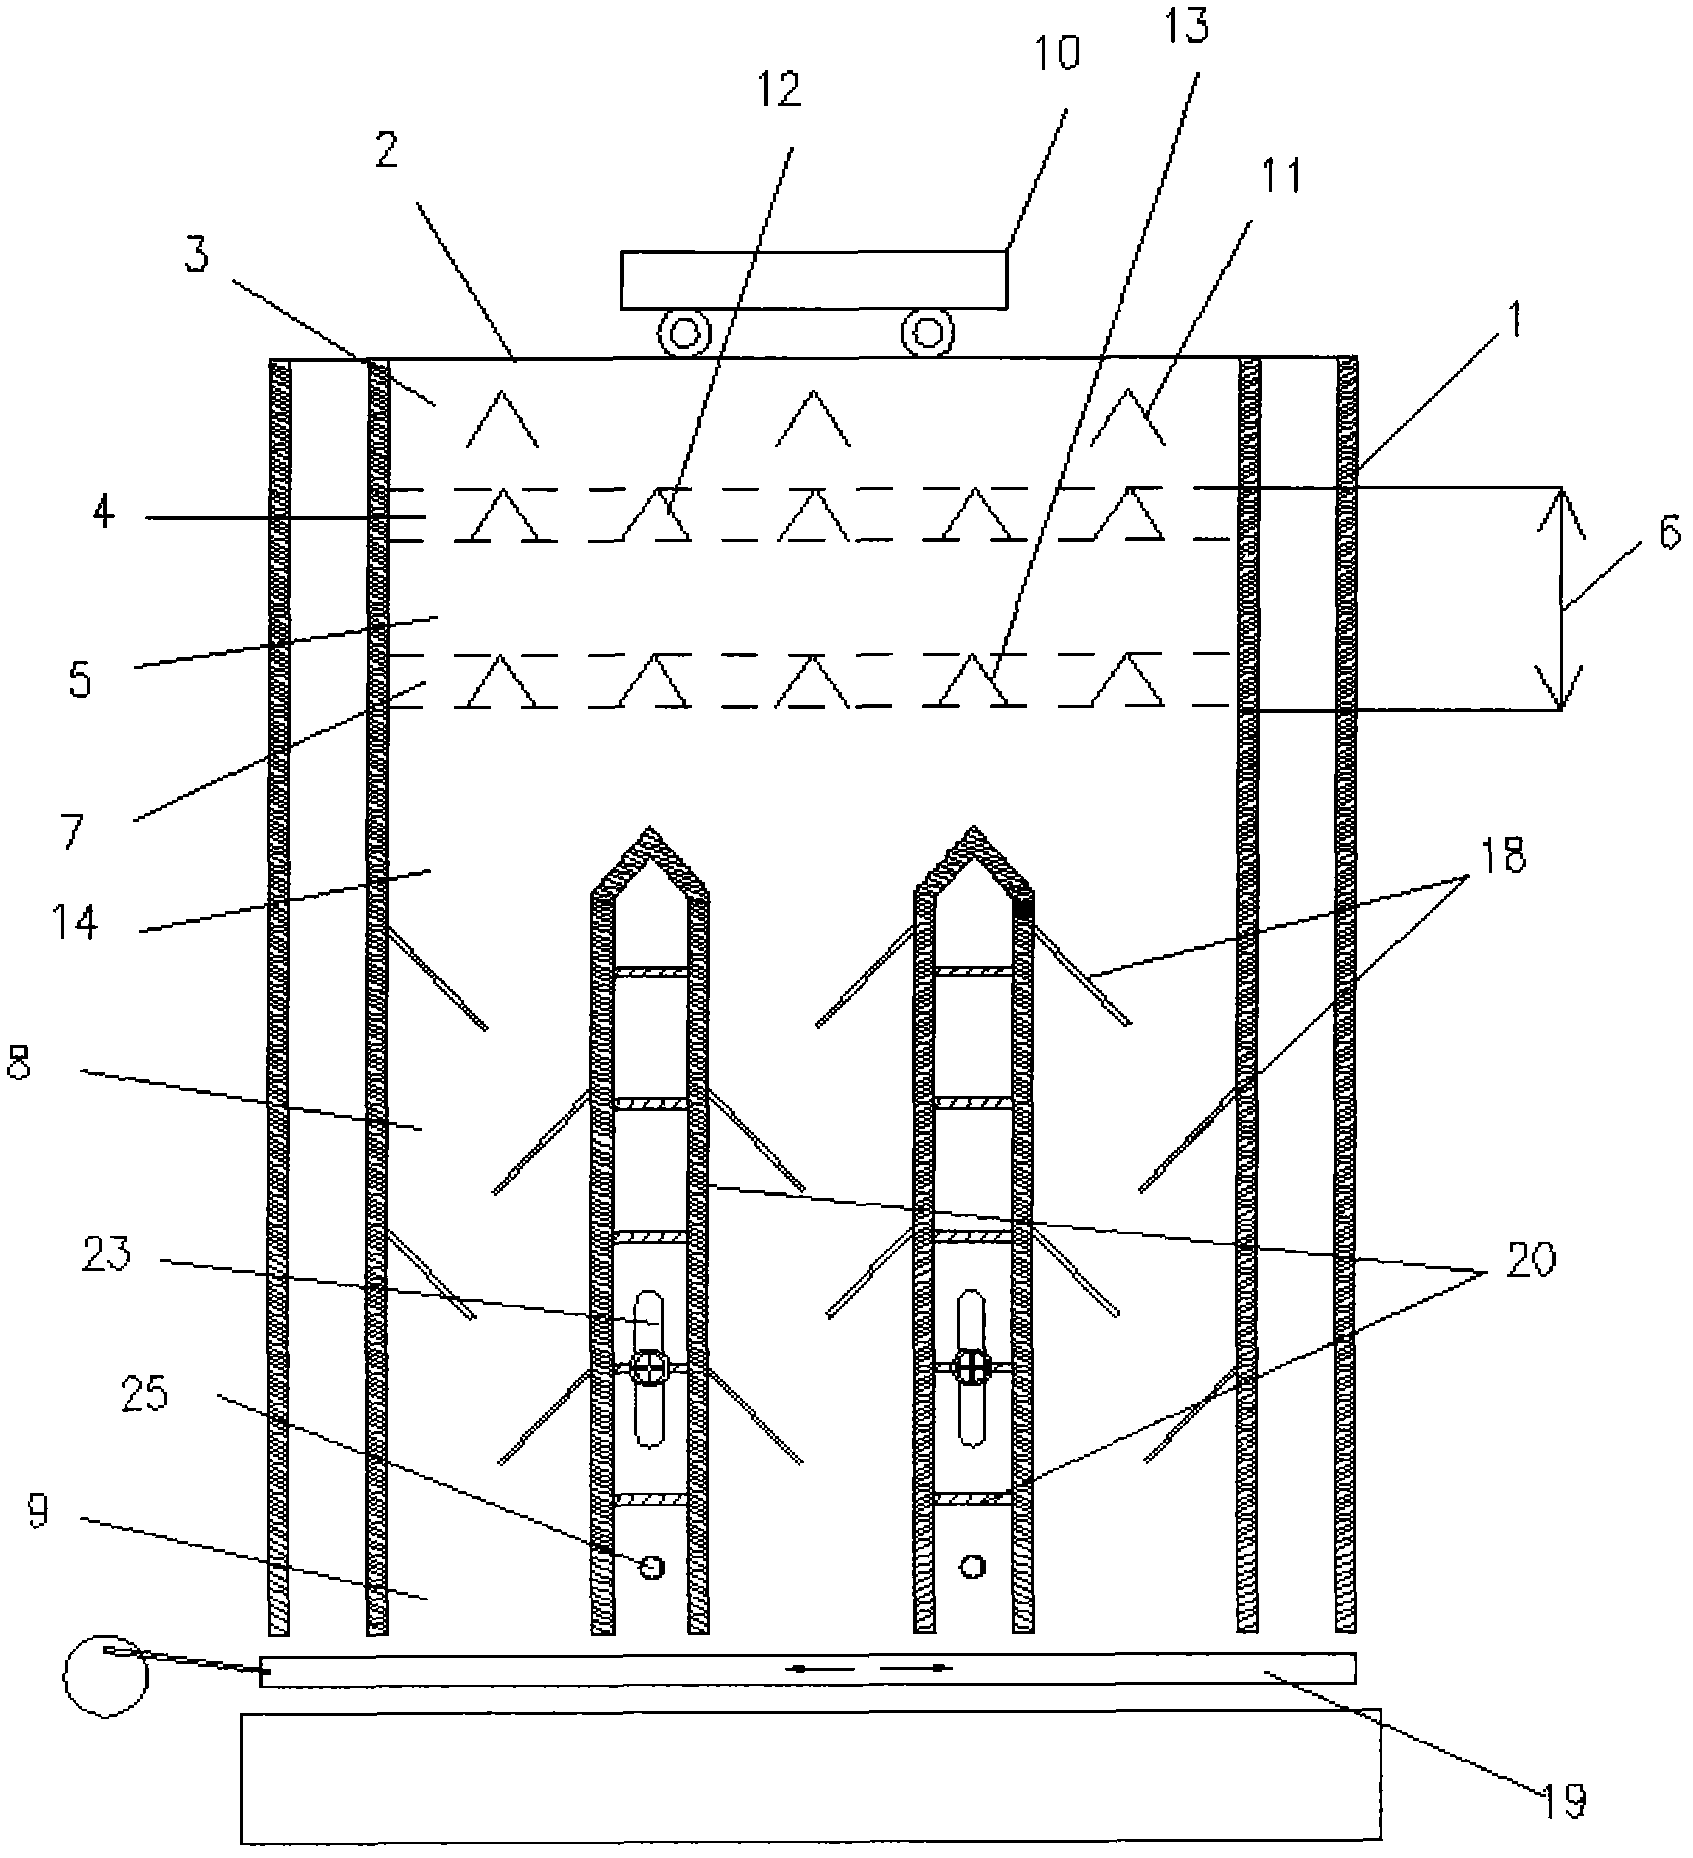 Pulverized coal coking equipment and method